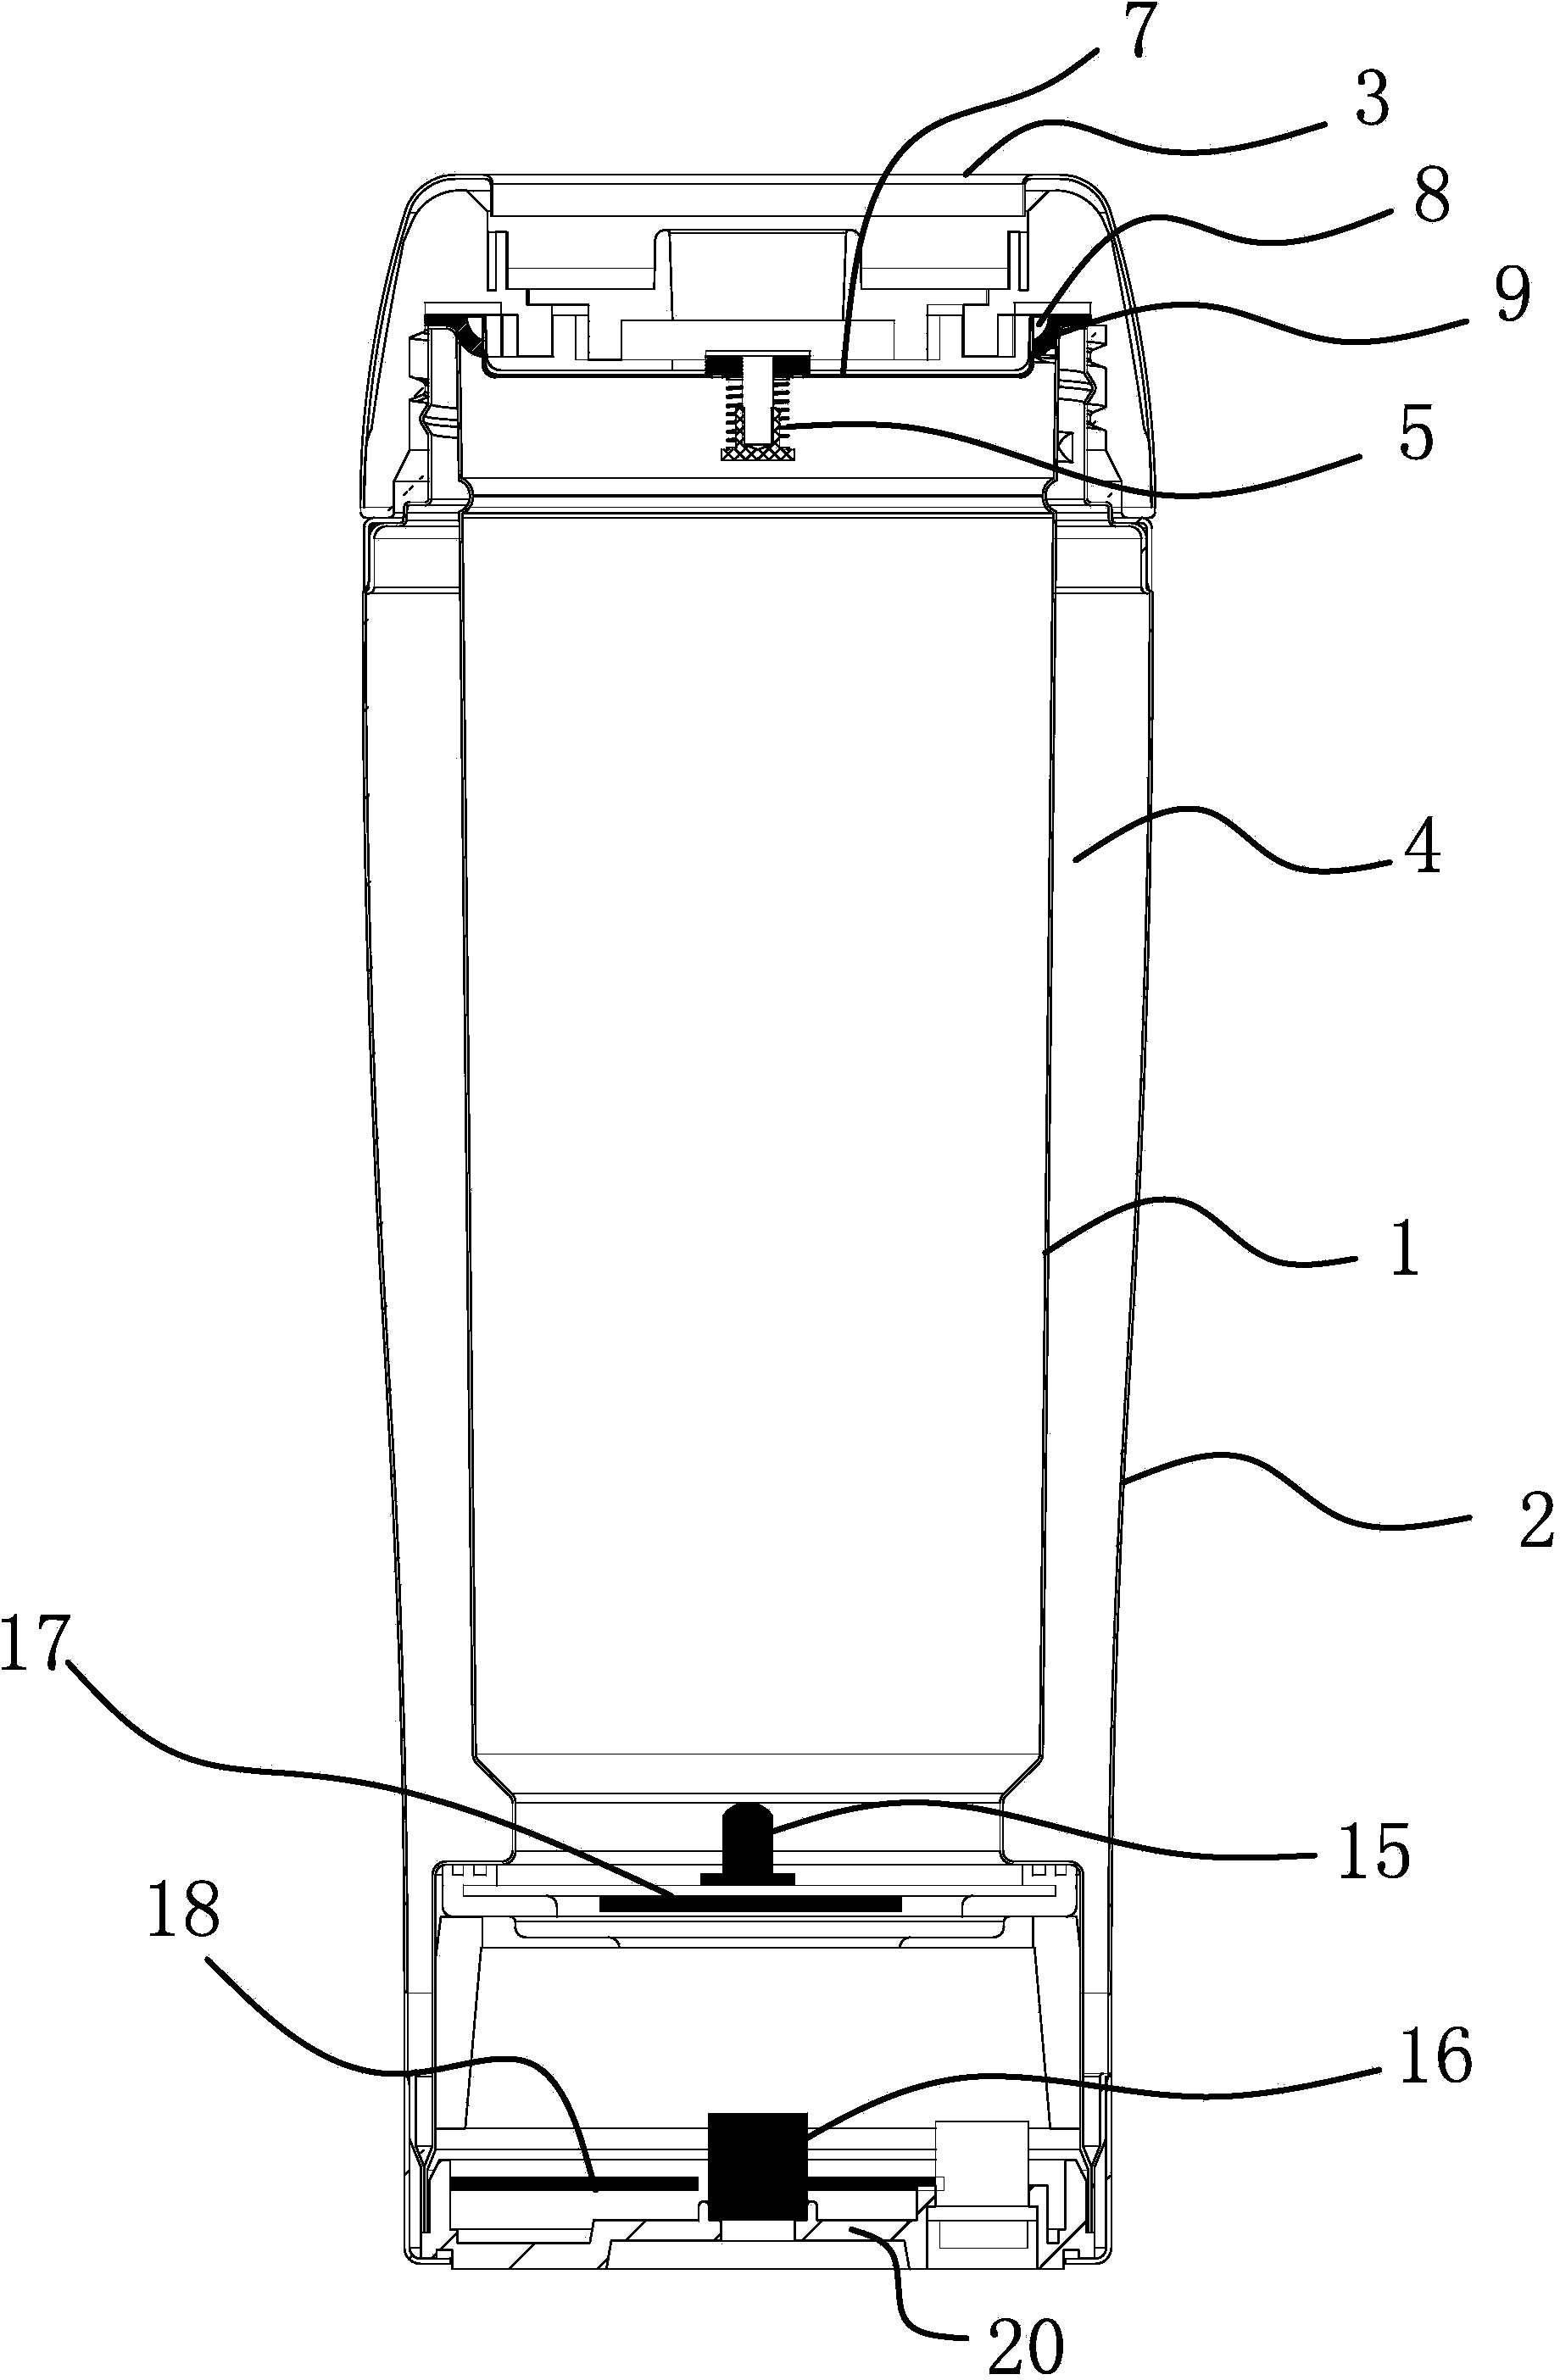 Automobile-mounted heating cup on automobile